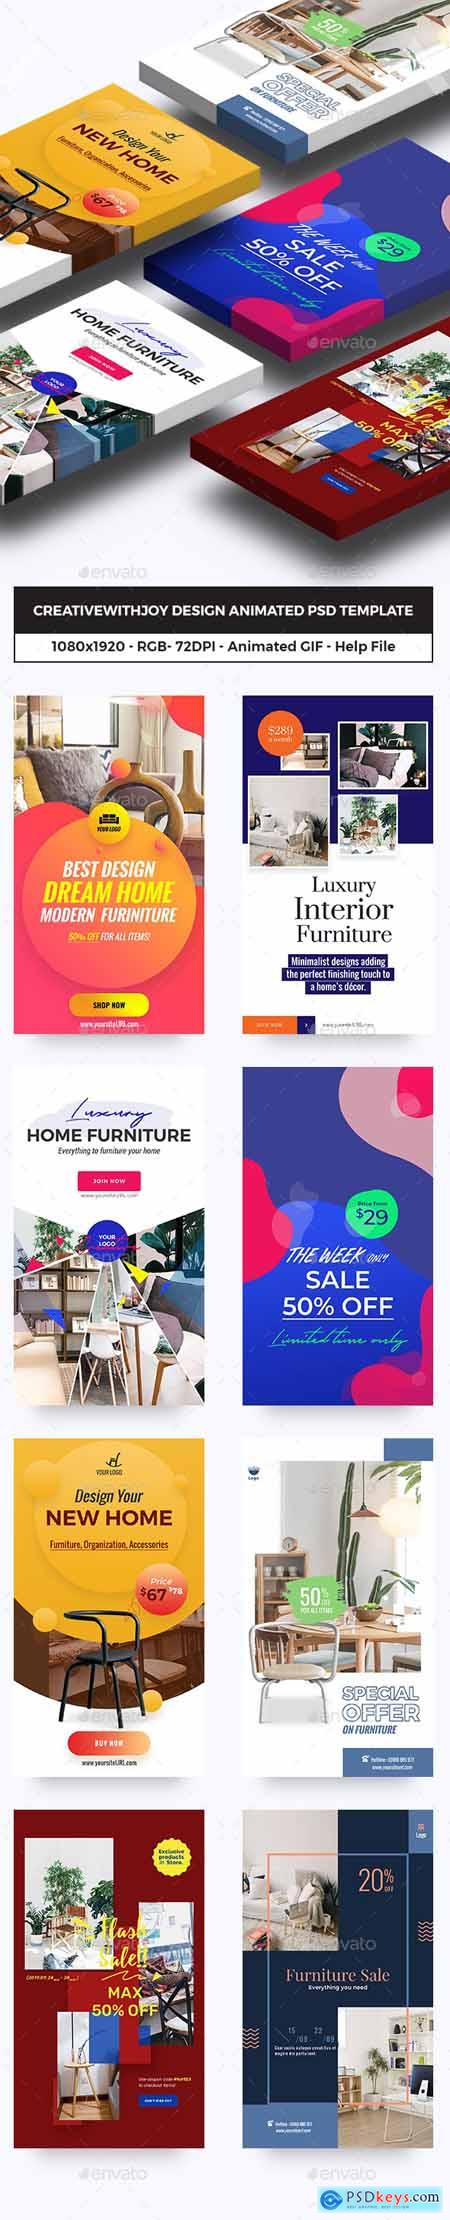 Furniture, Decor Animated GIFs Instagram Stories